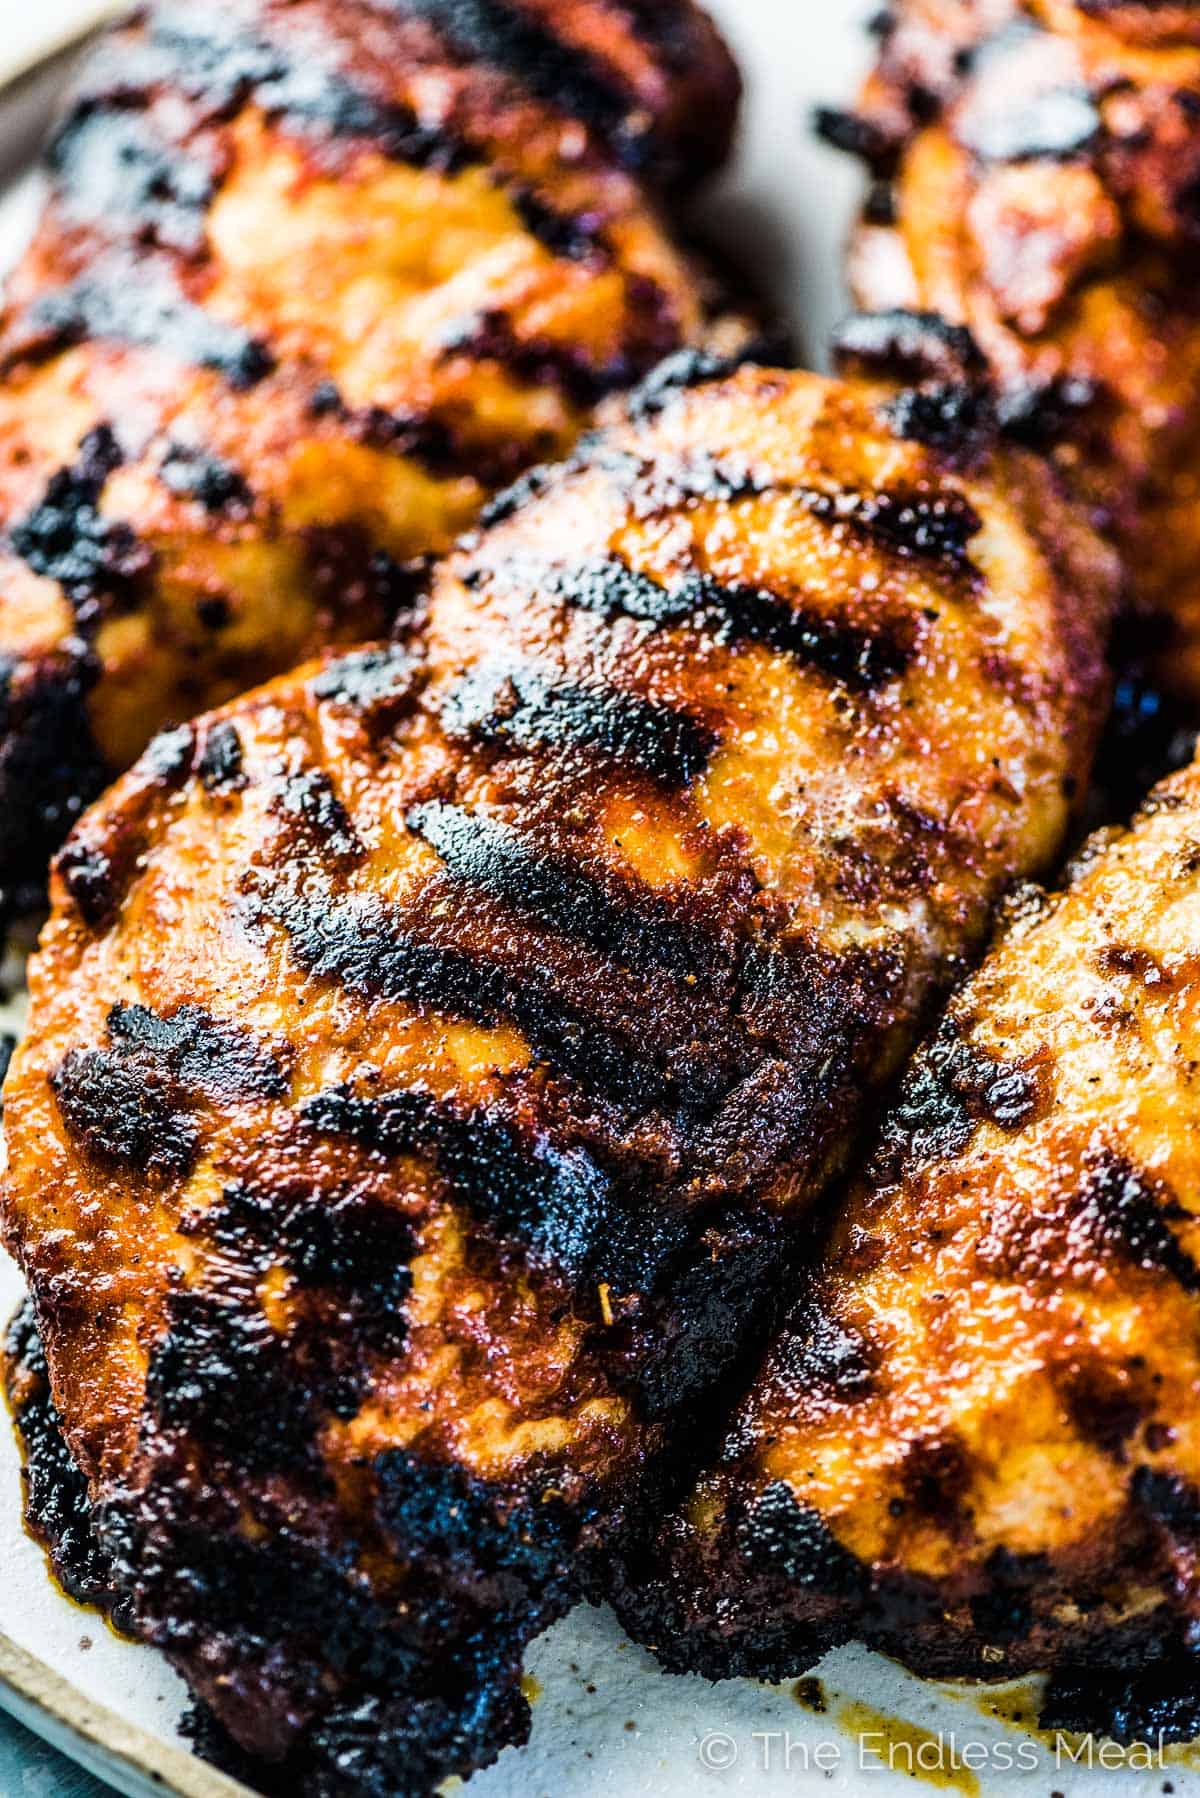 4 juicy grilled chicken breast on a plate with tasty grill marks all over them.